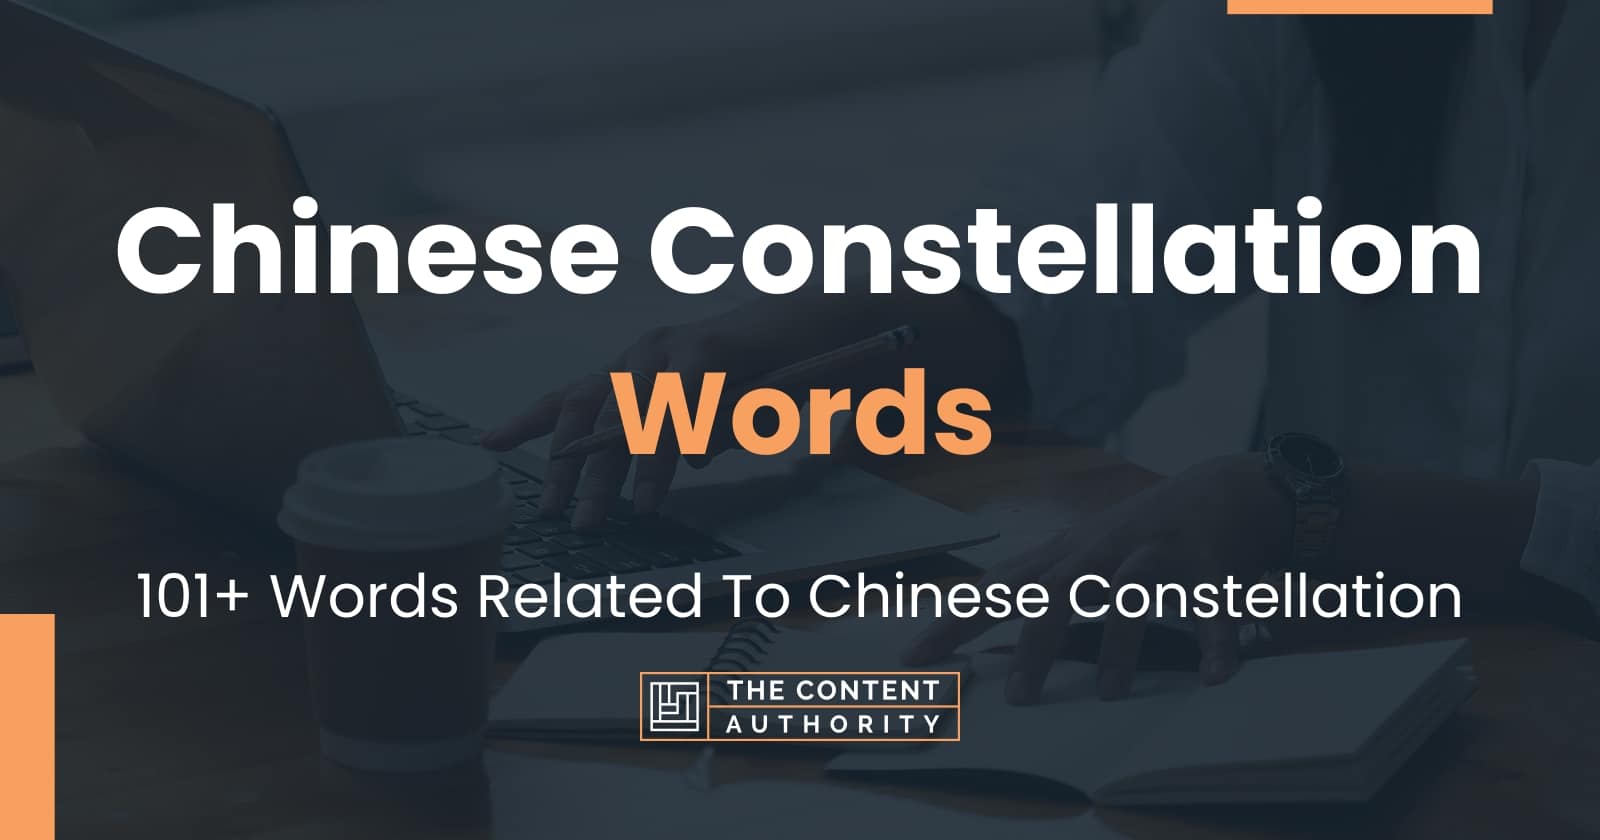 Chinese Constellation Words - 101+ Words Related To Chinese Constellation